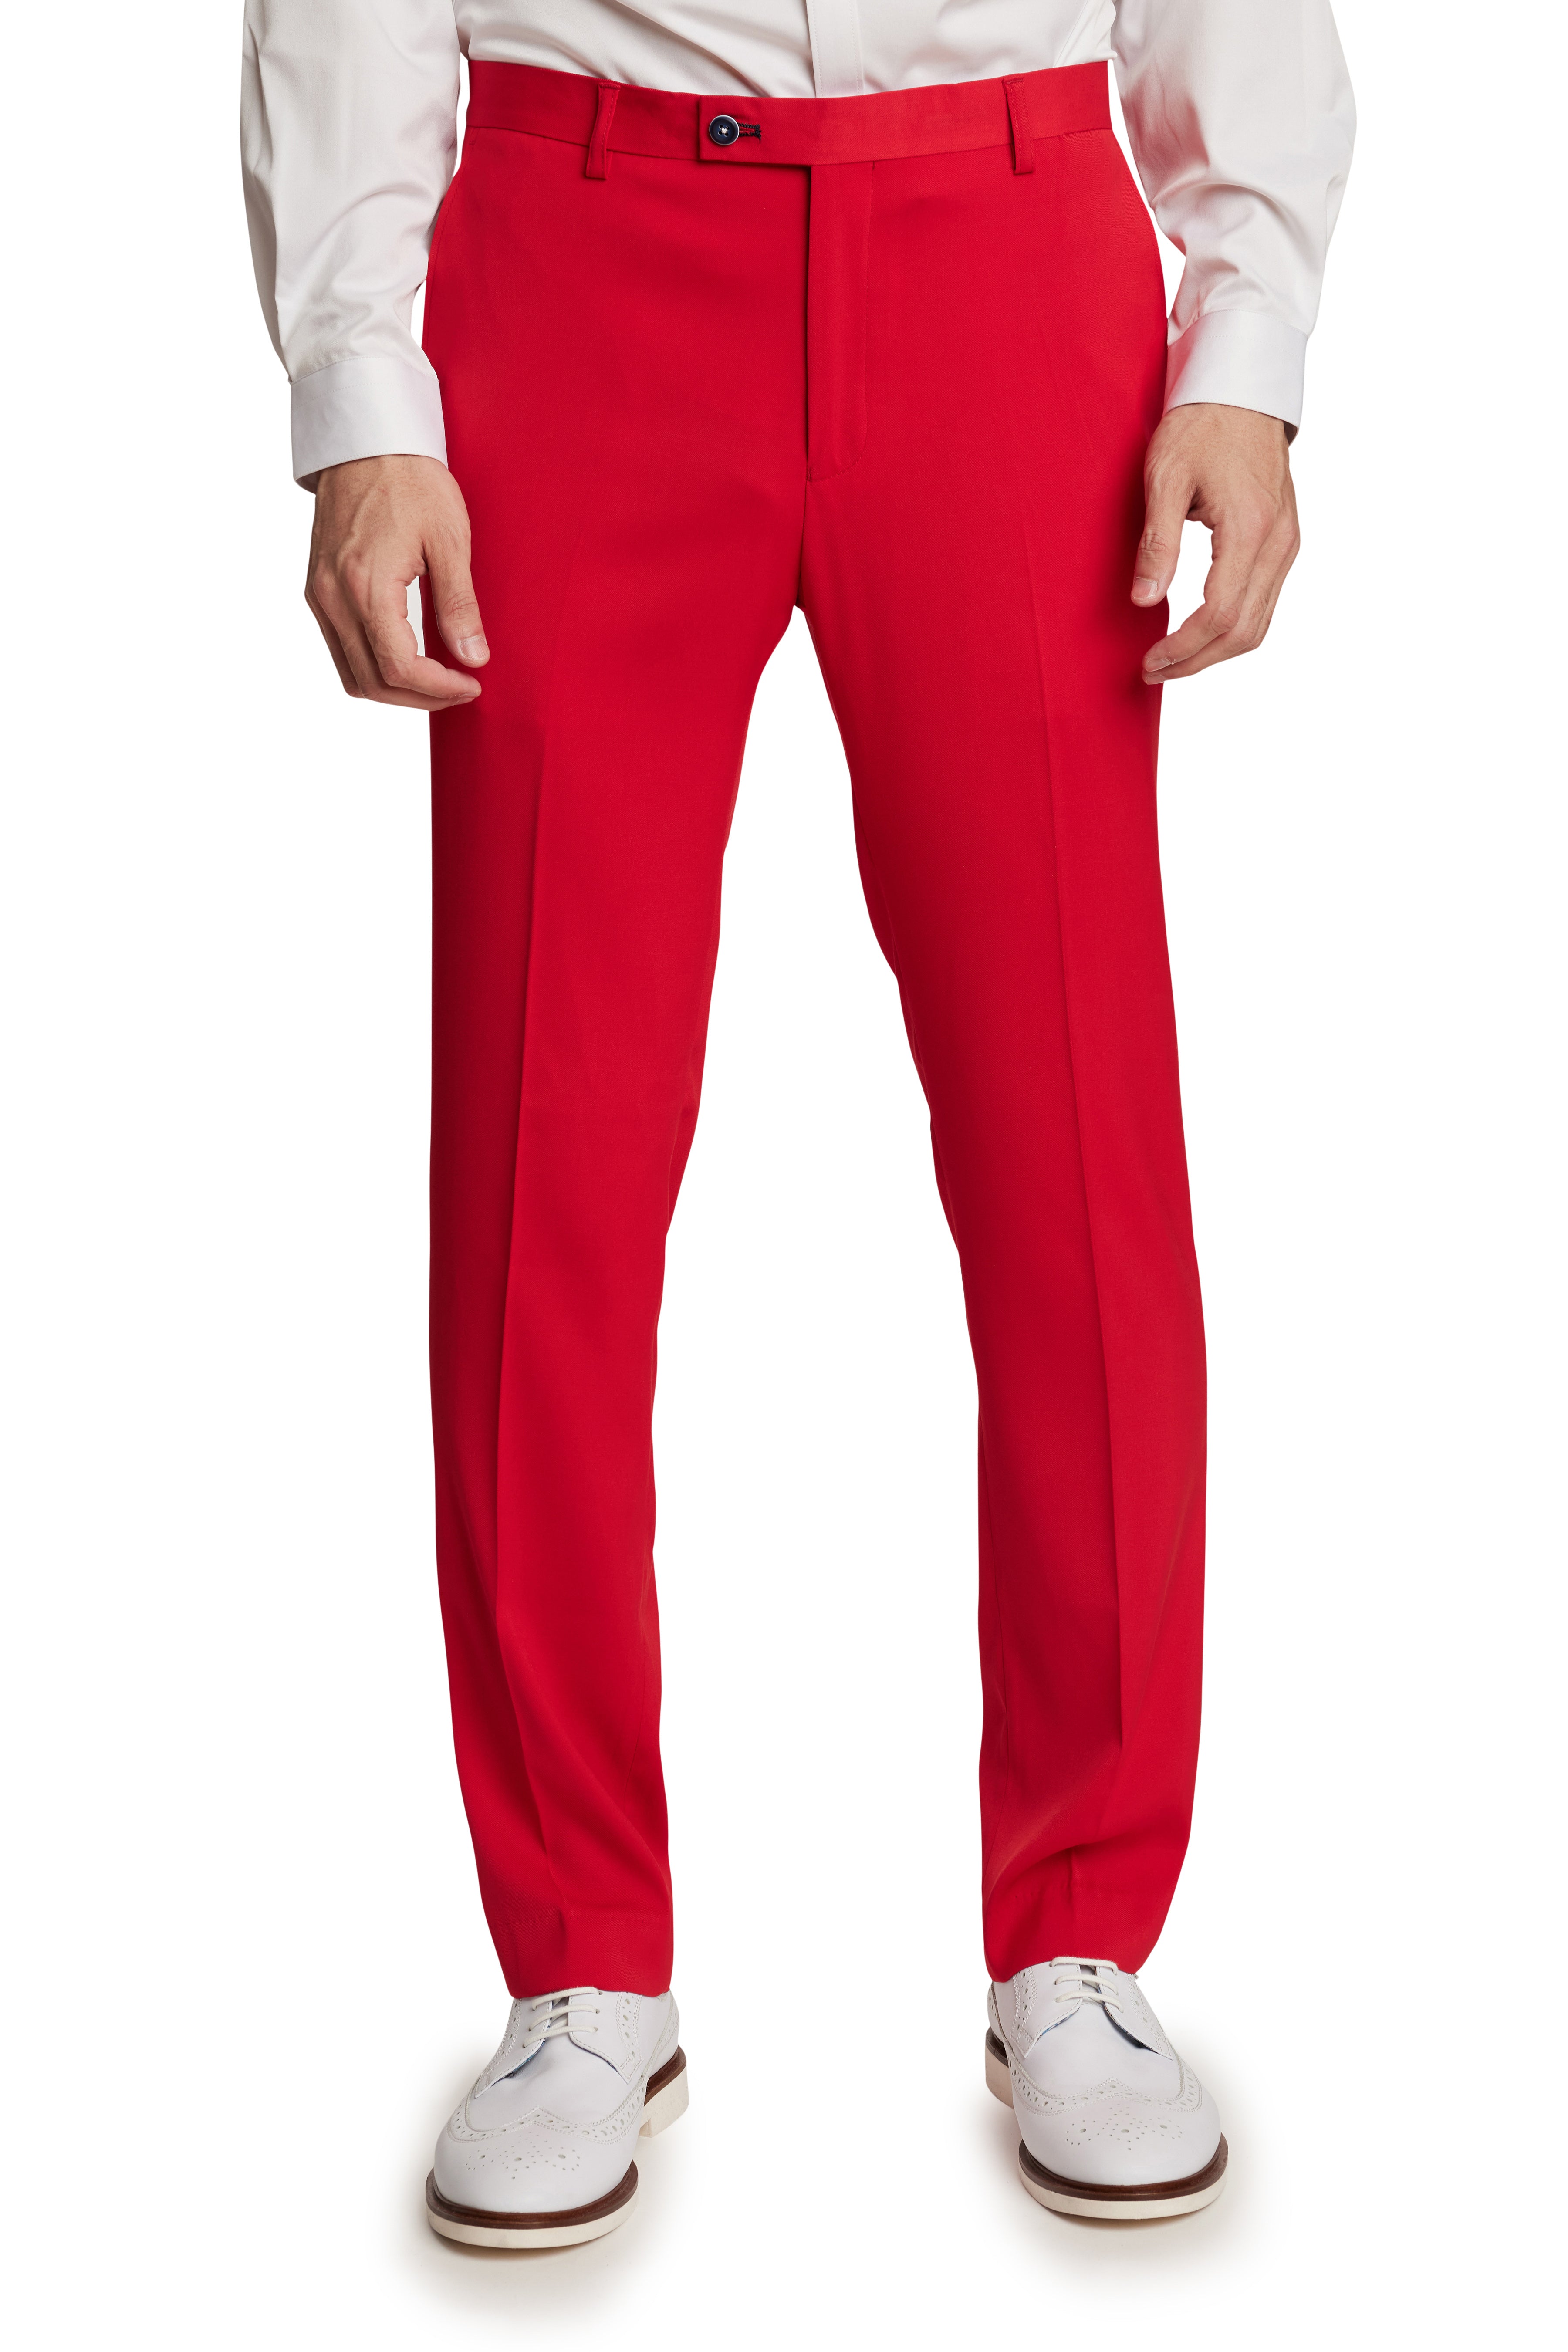 Downing Pants - slim - Hot Rod Red